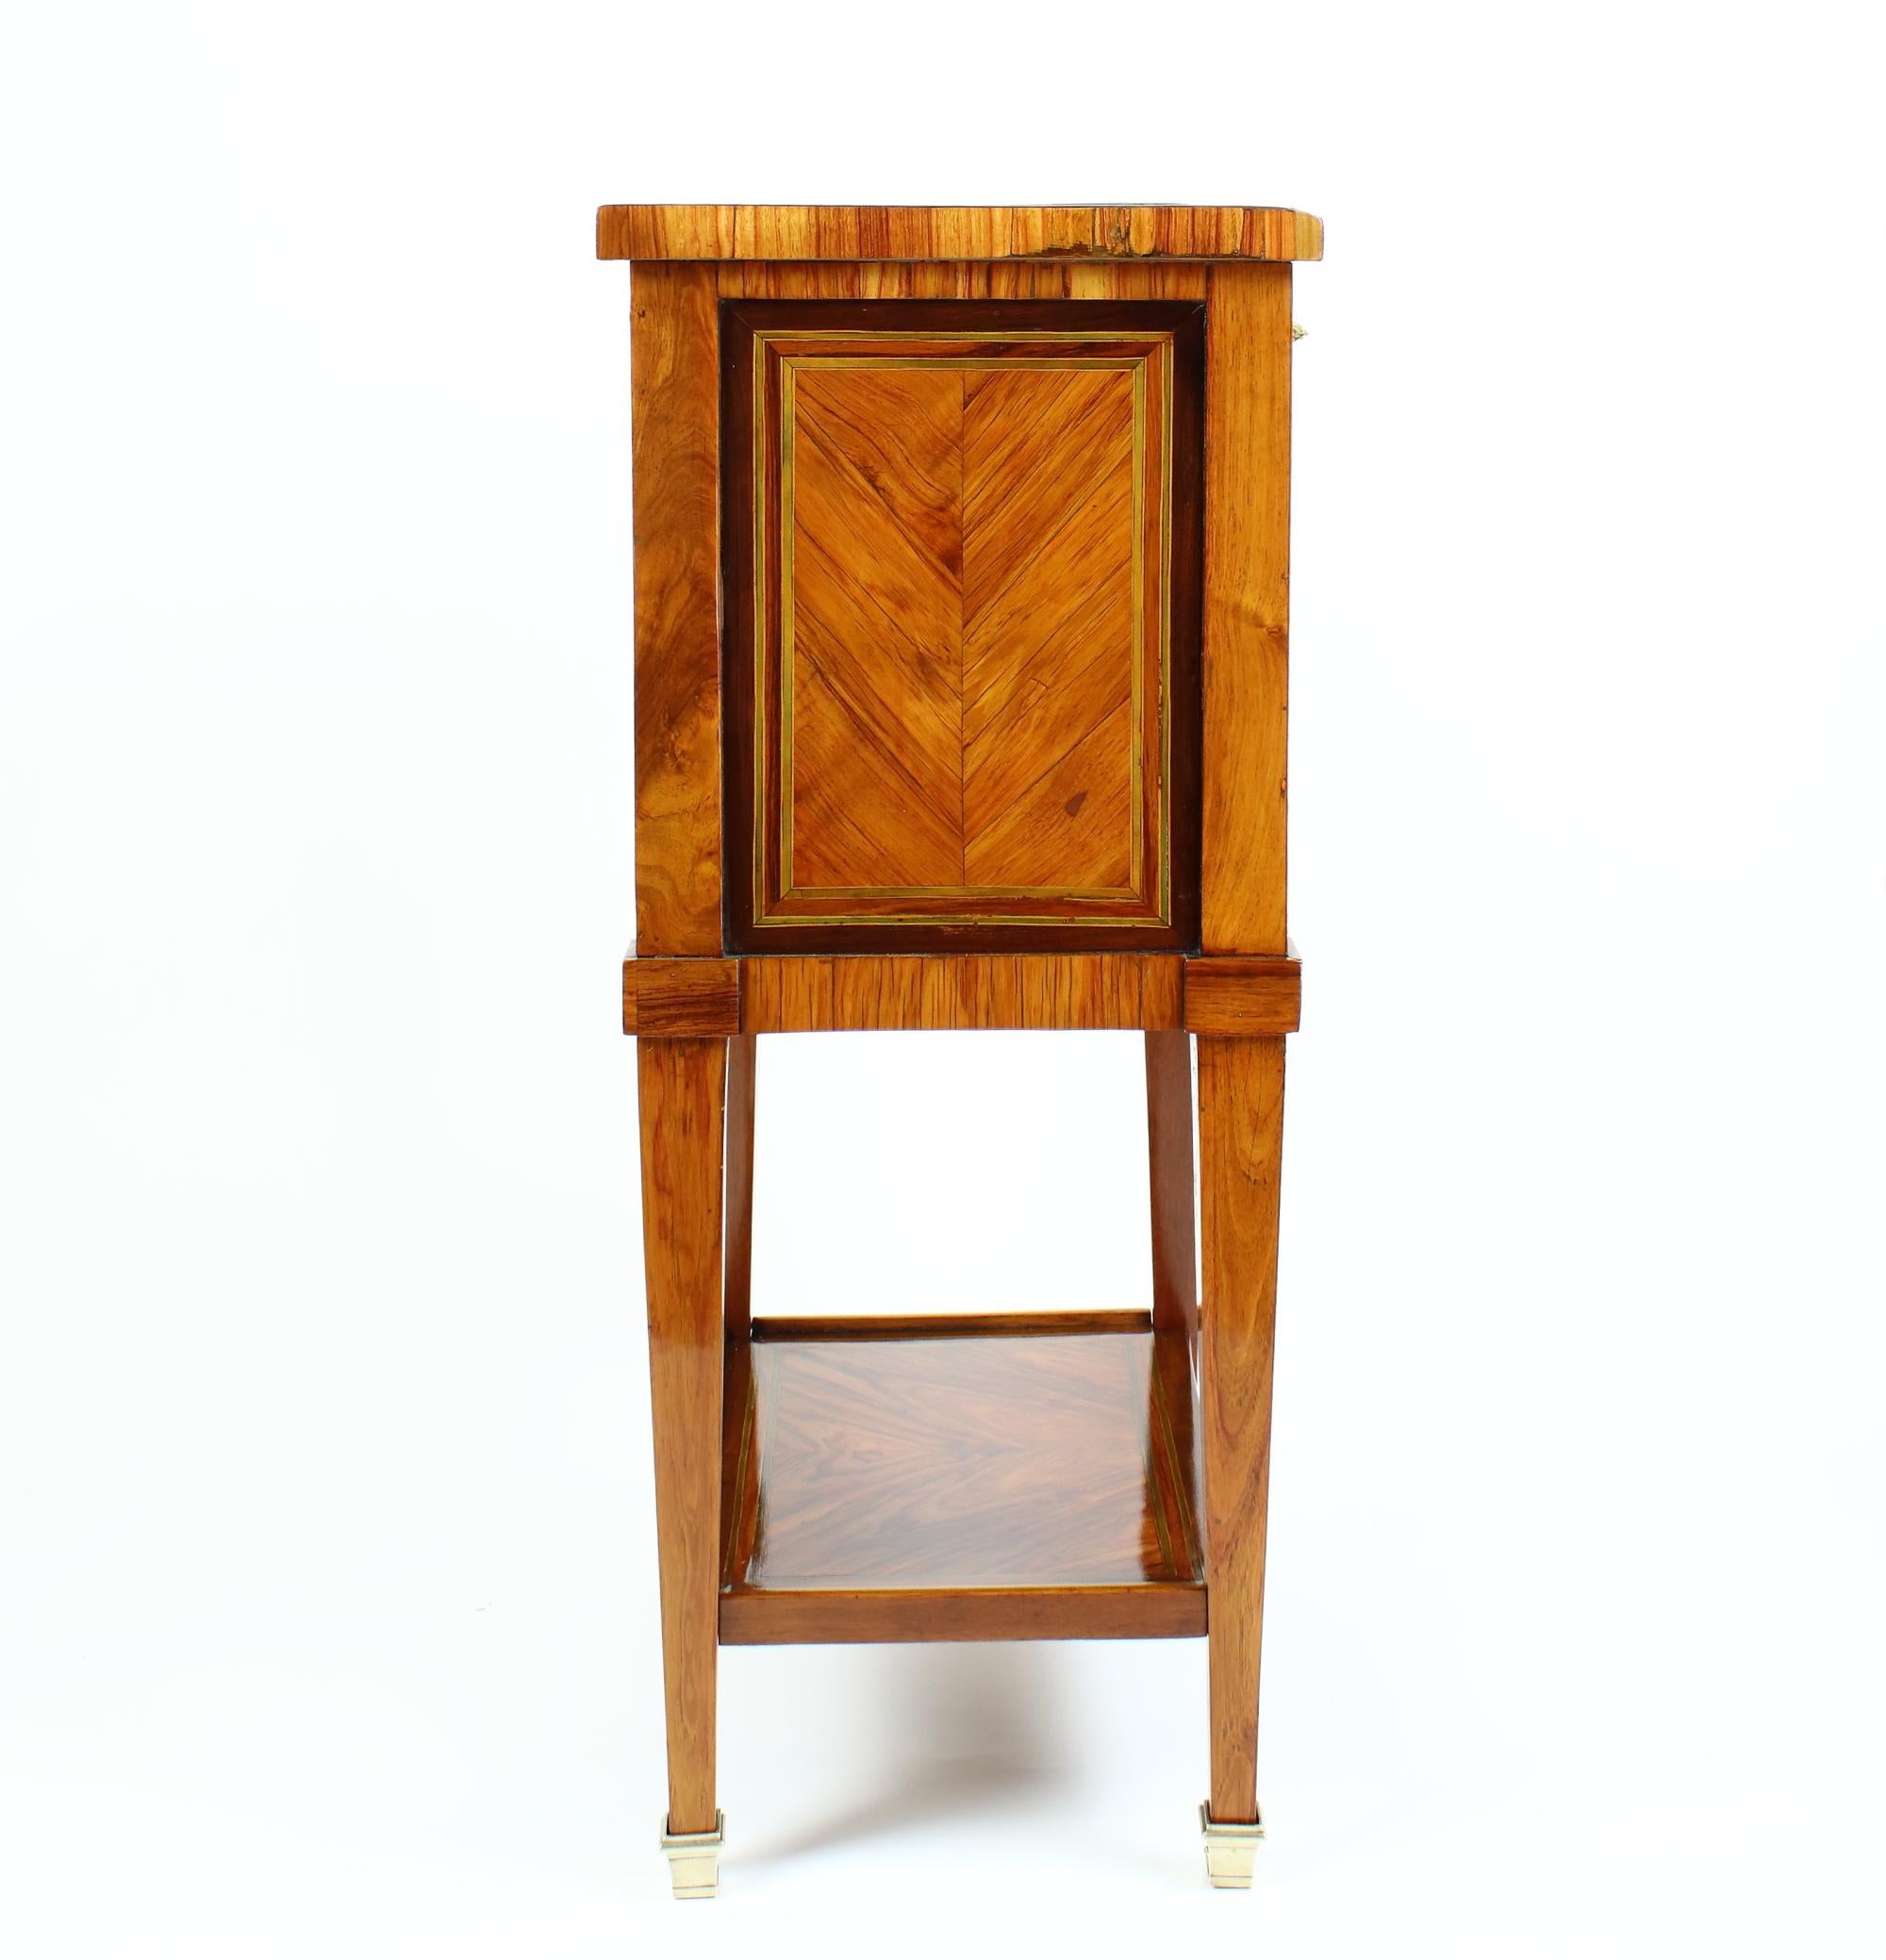 Fine small Louis period marquetry side or writing table, a so-called 